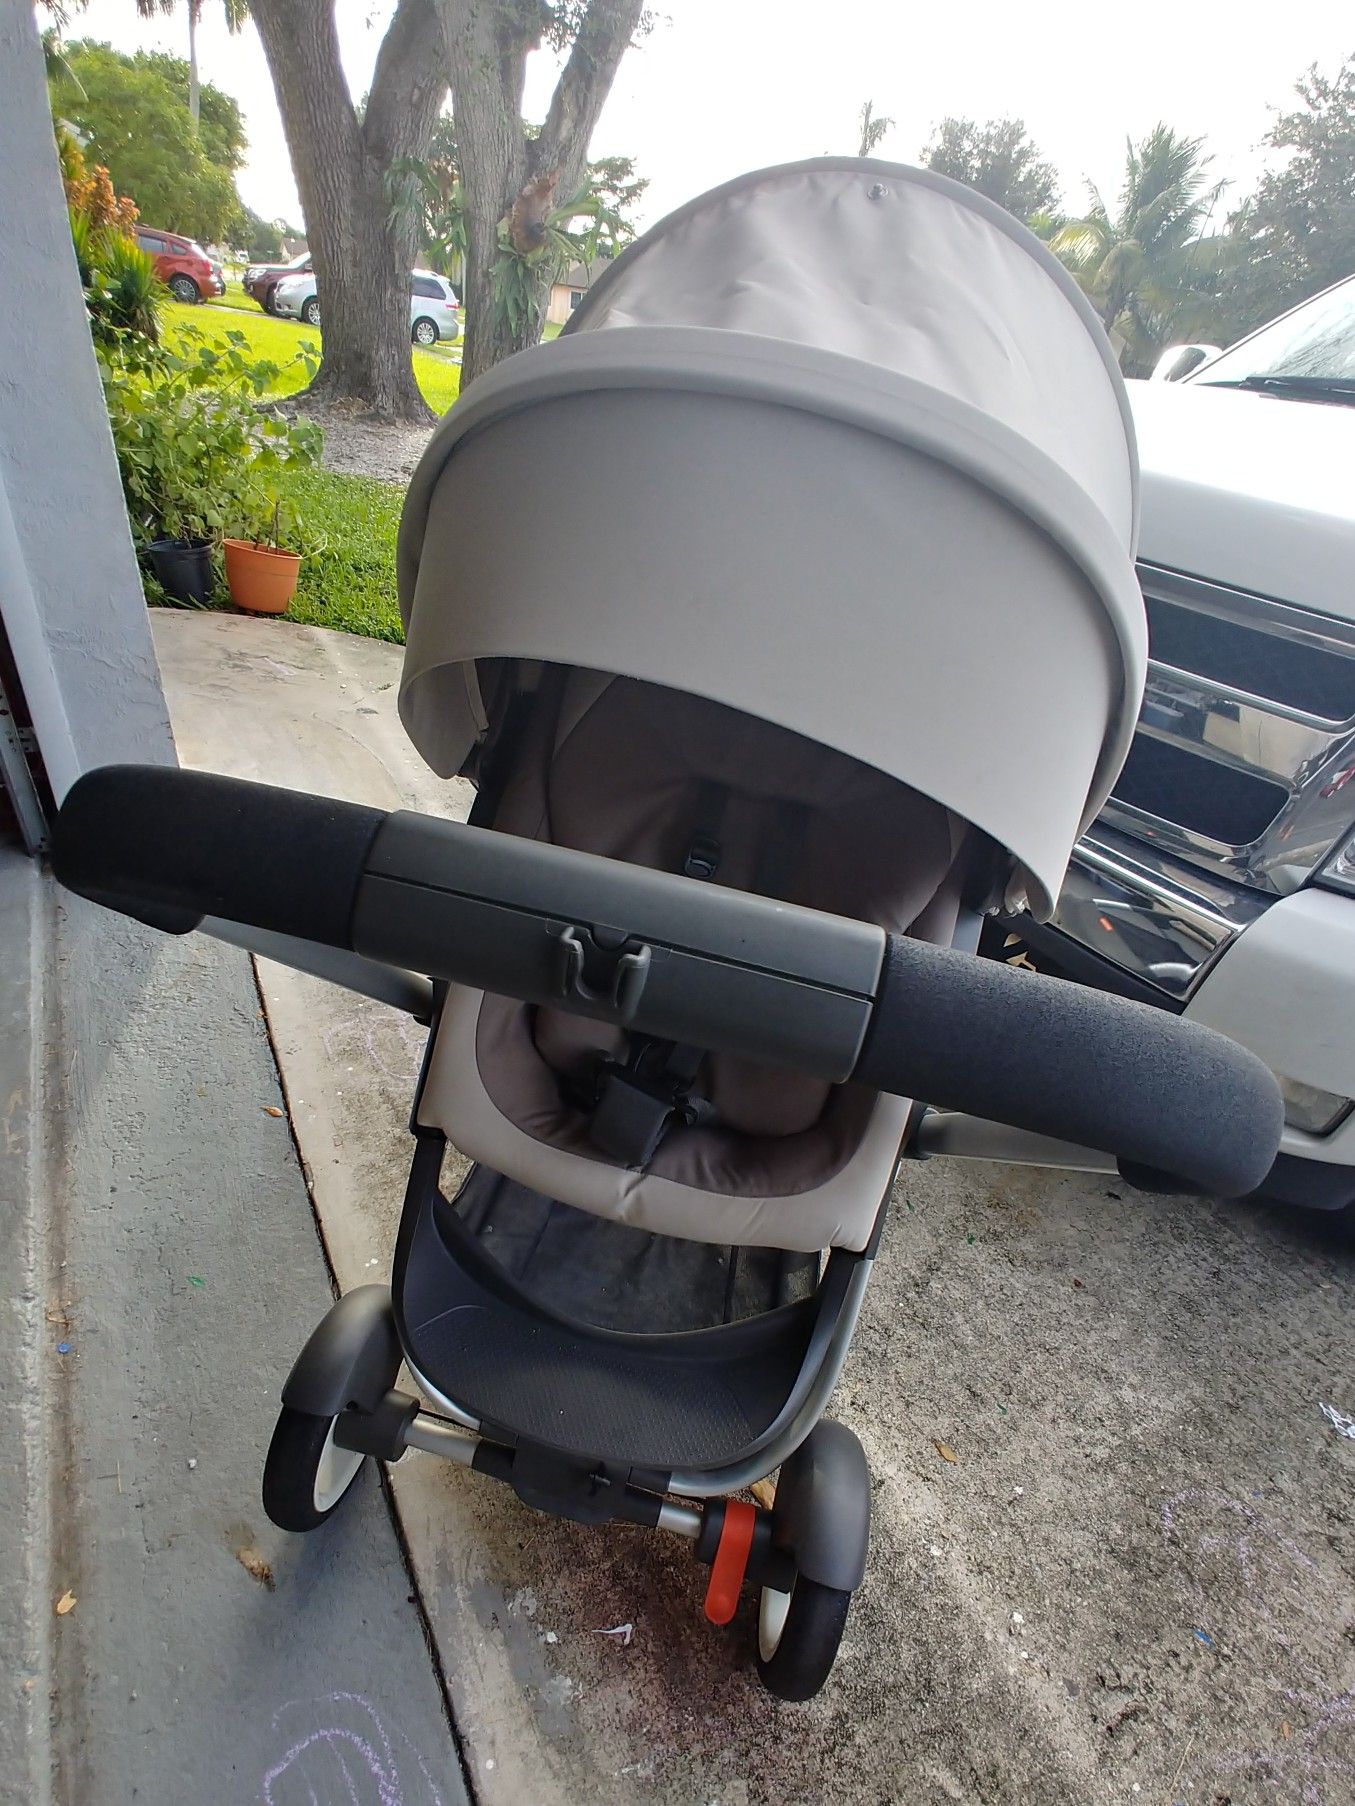 Stokke stroller/carseat & carrycot